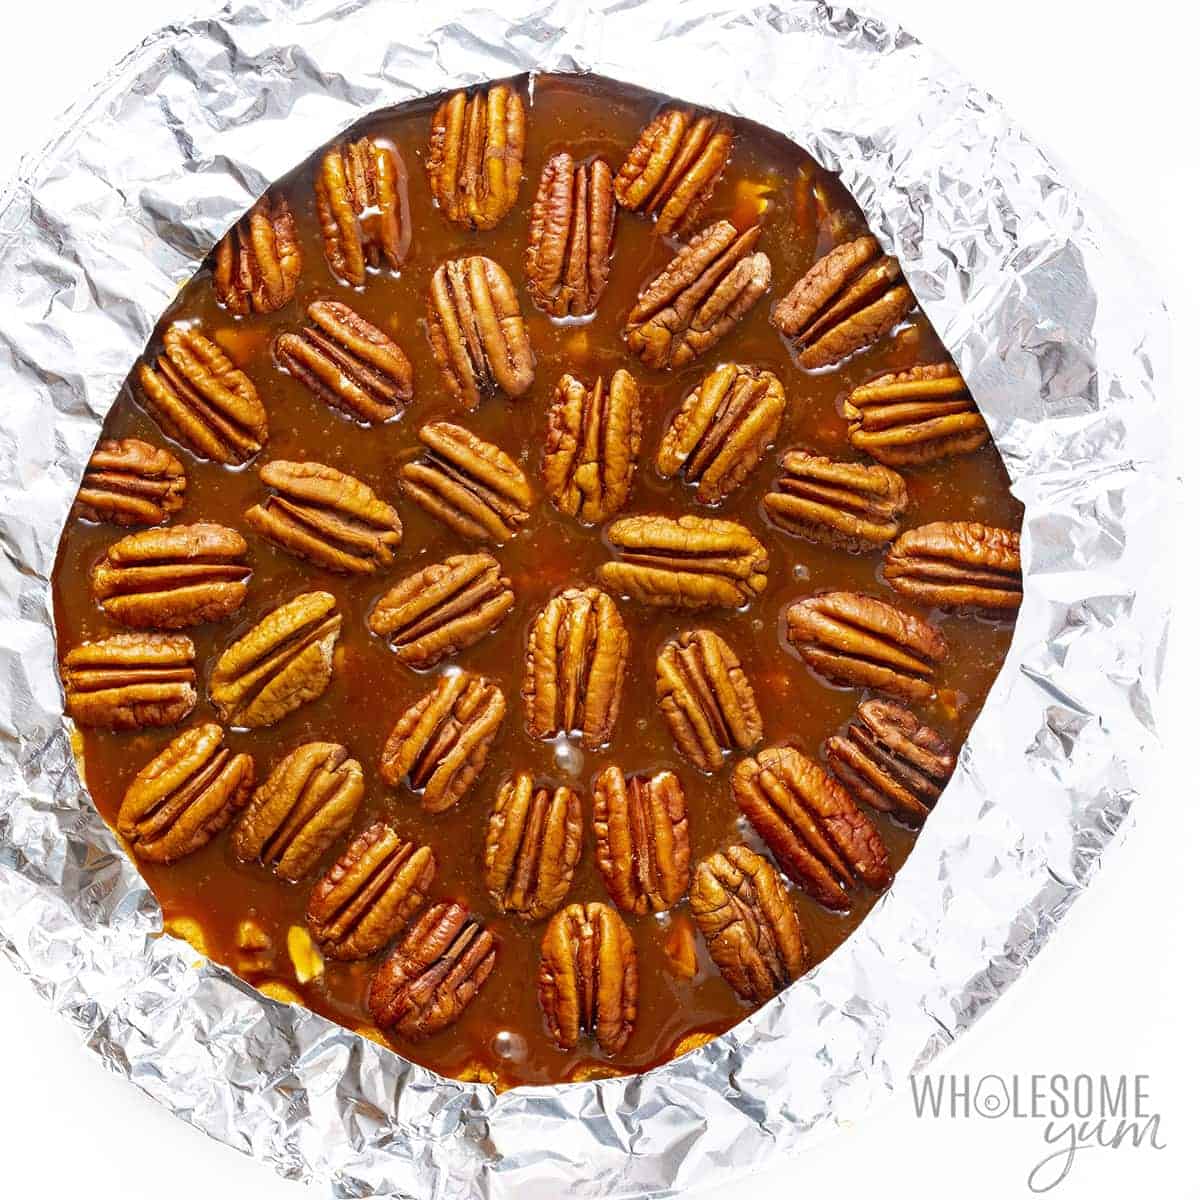 Keto pecan pie before baking, with crust edges covered